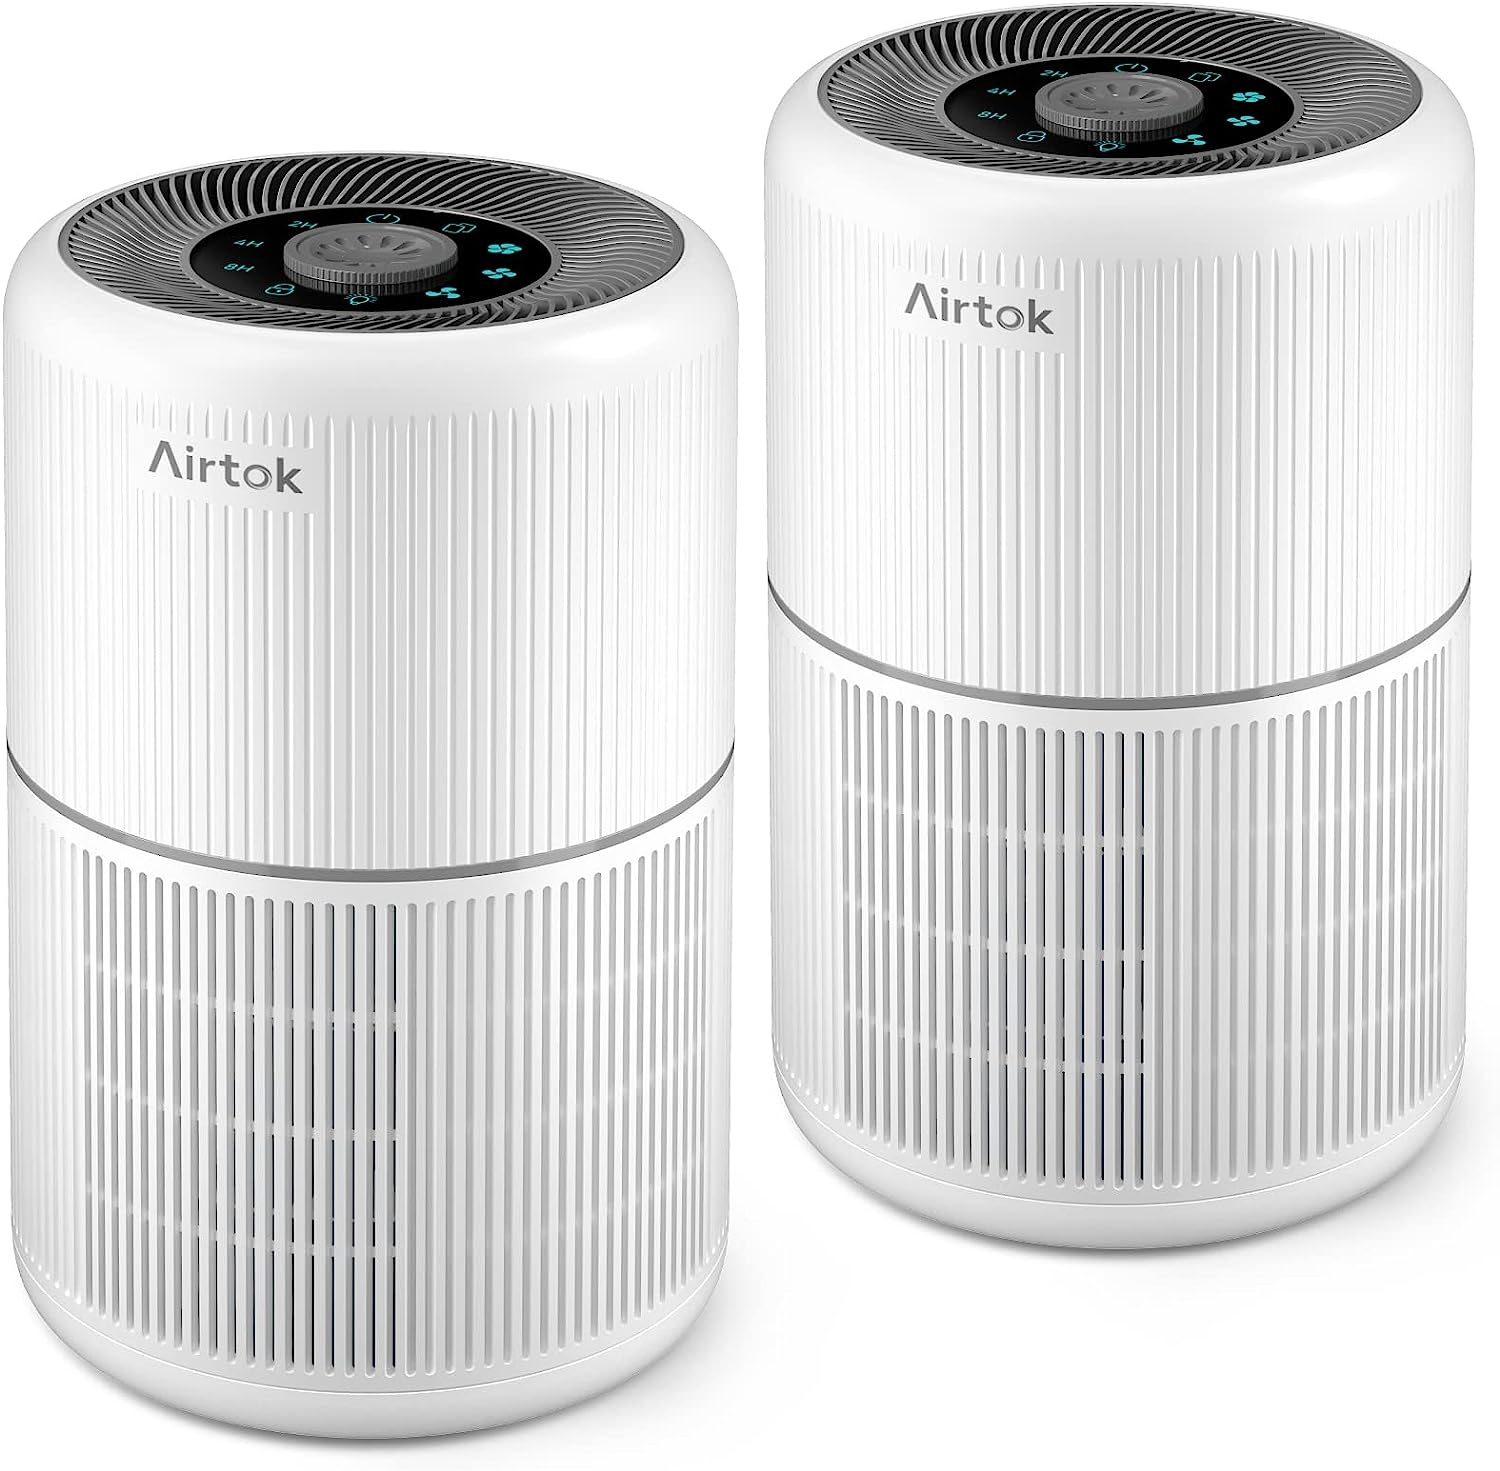 2 Pack Air Purifier for Home Bedroom with H13 True [...]